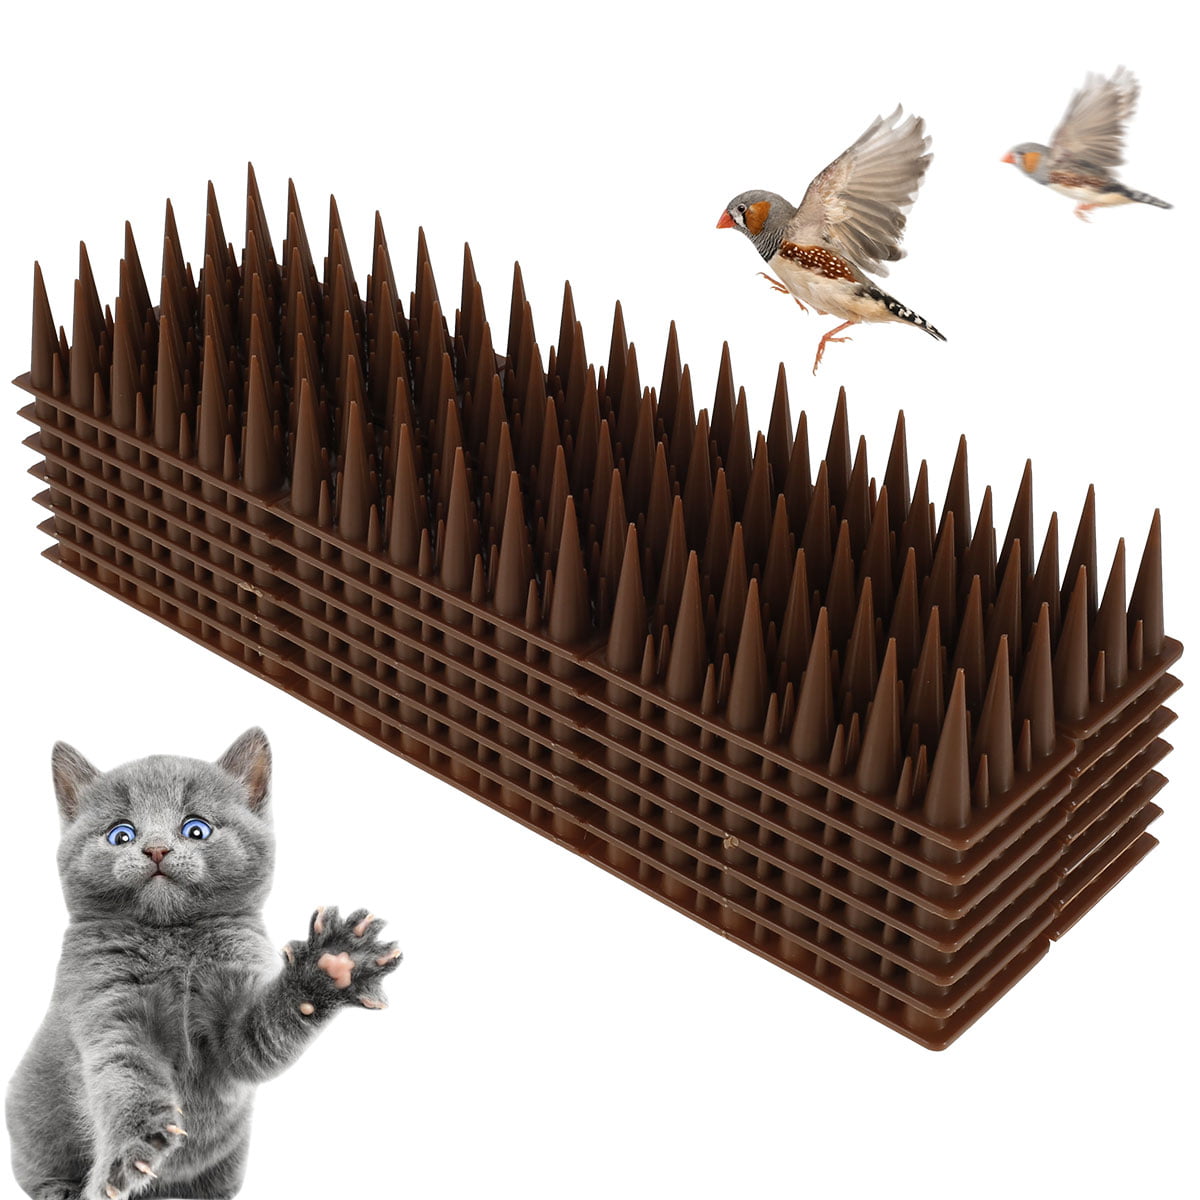 ANTI CLIMB SPIKES x 10 FENCE AND WALL SPIKES CAT REPELLENT INTRUDER DETERRENT 